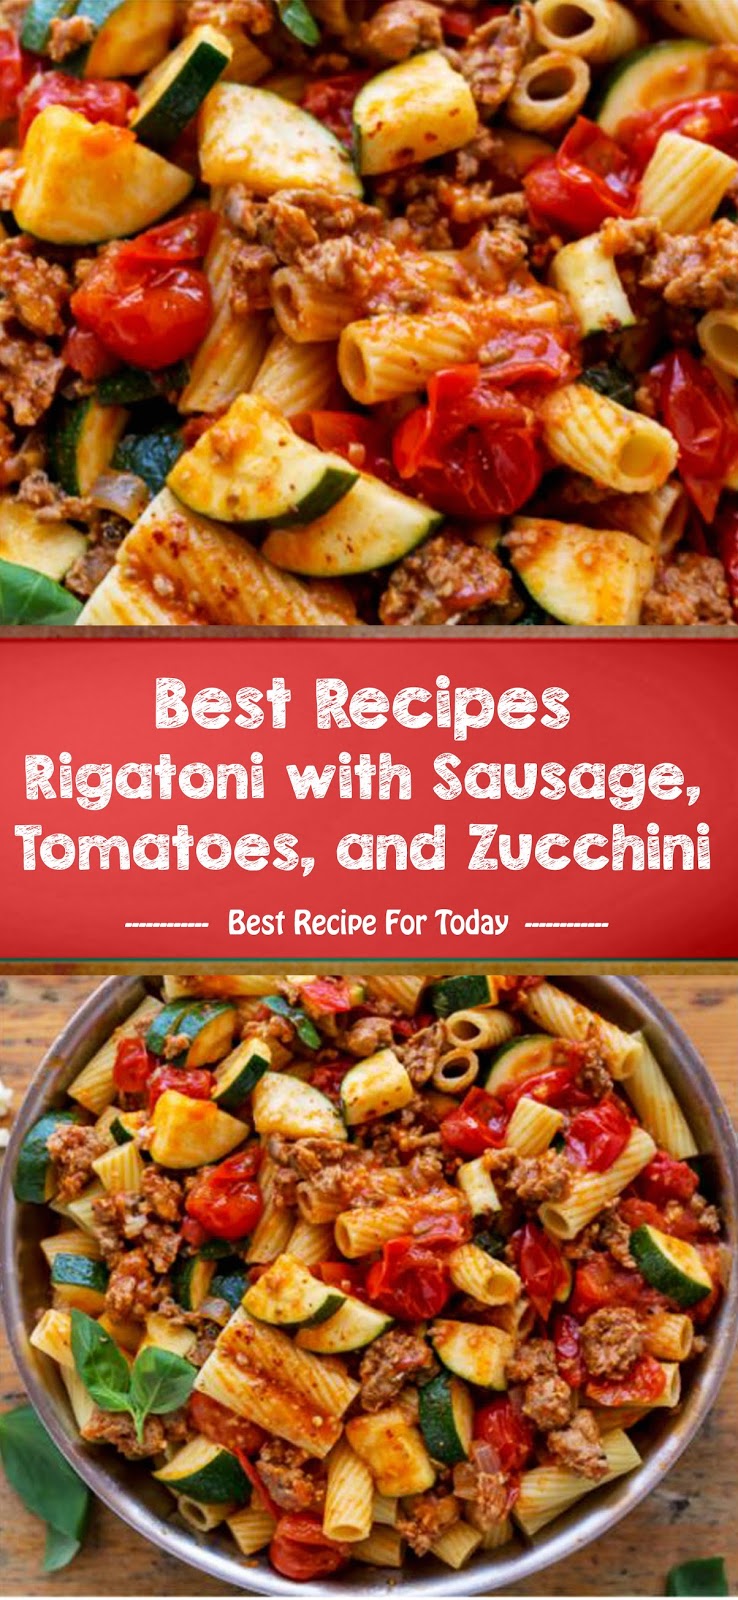 Best Recipes Rigatoni with Sausage, Tomatoes, and Zucchini ...